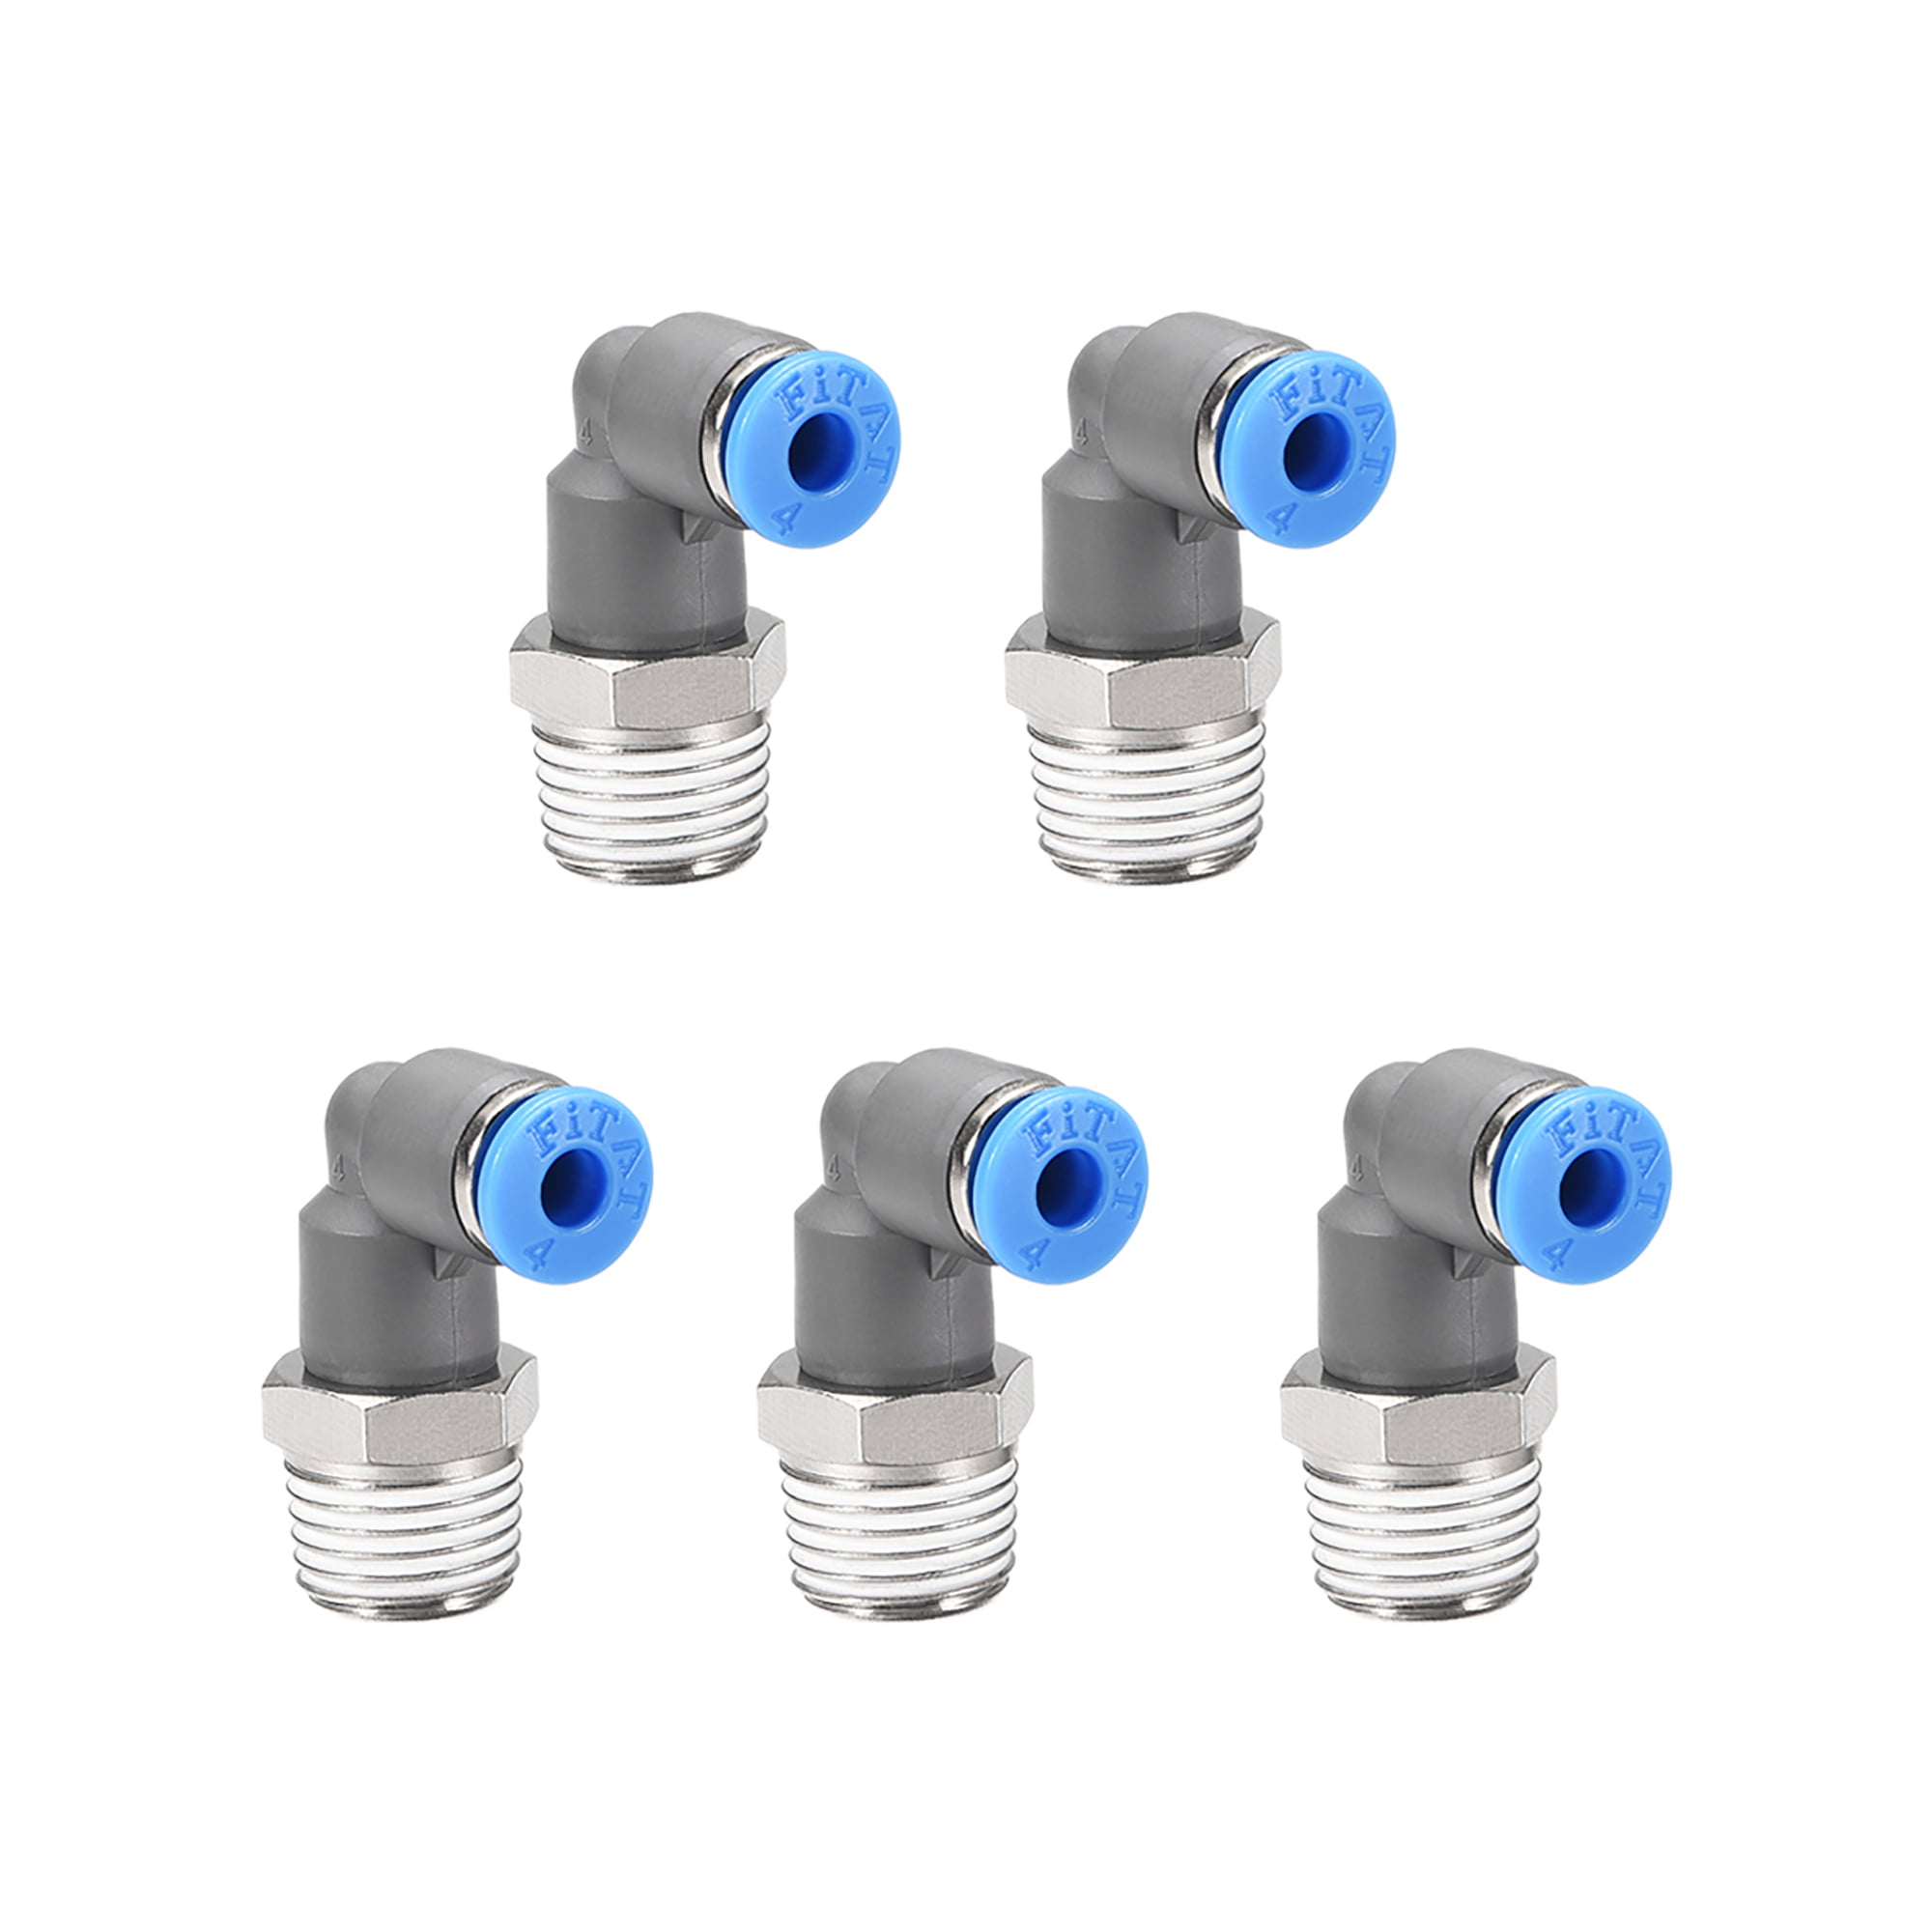 5 X Male Straight Connector Tube OD 5/32" X NPT 1/4 PU Air Push In Fitting 